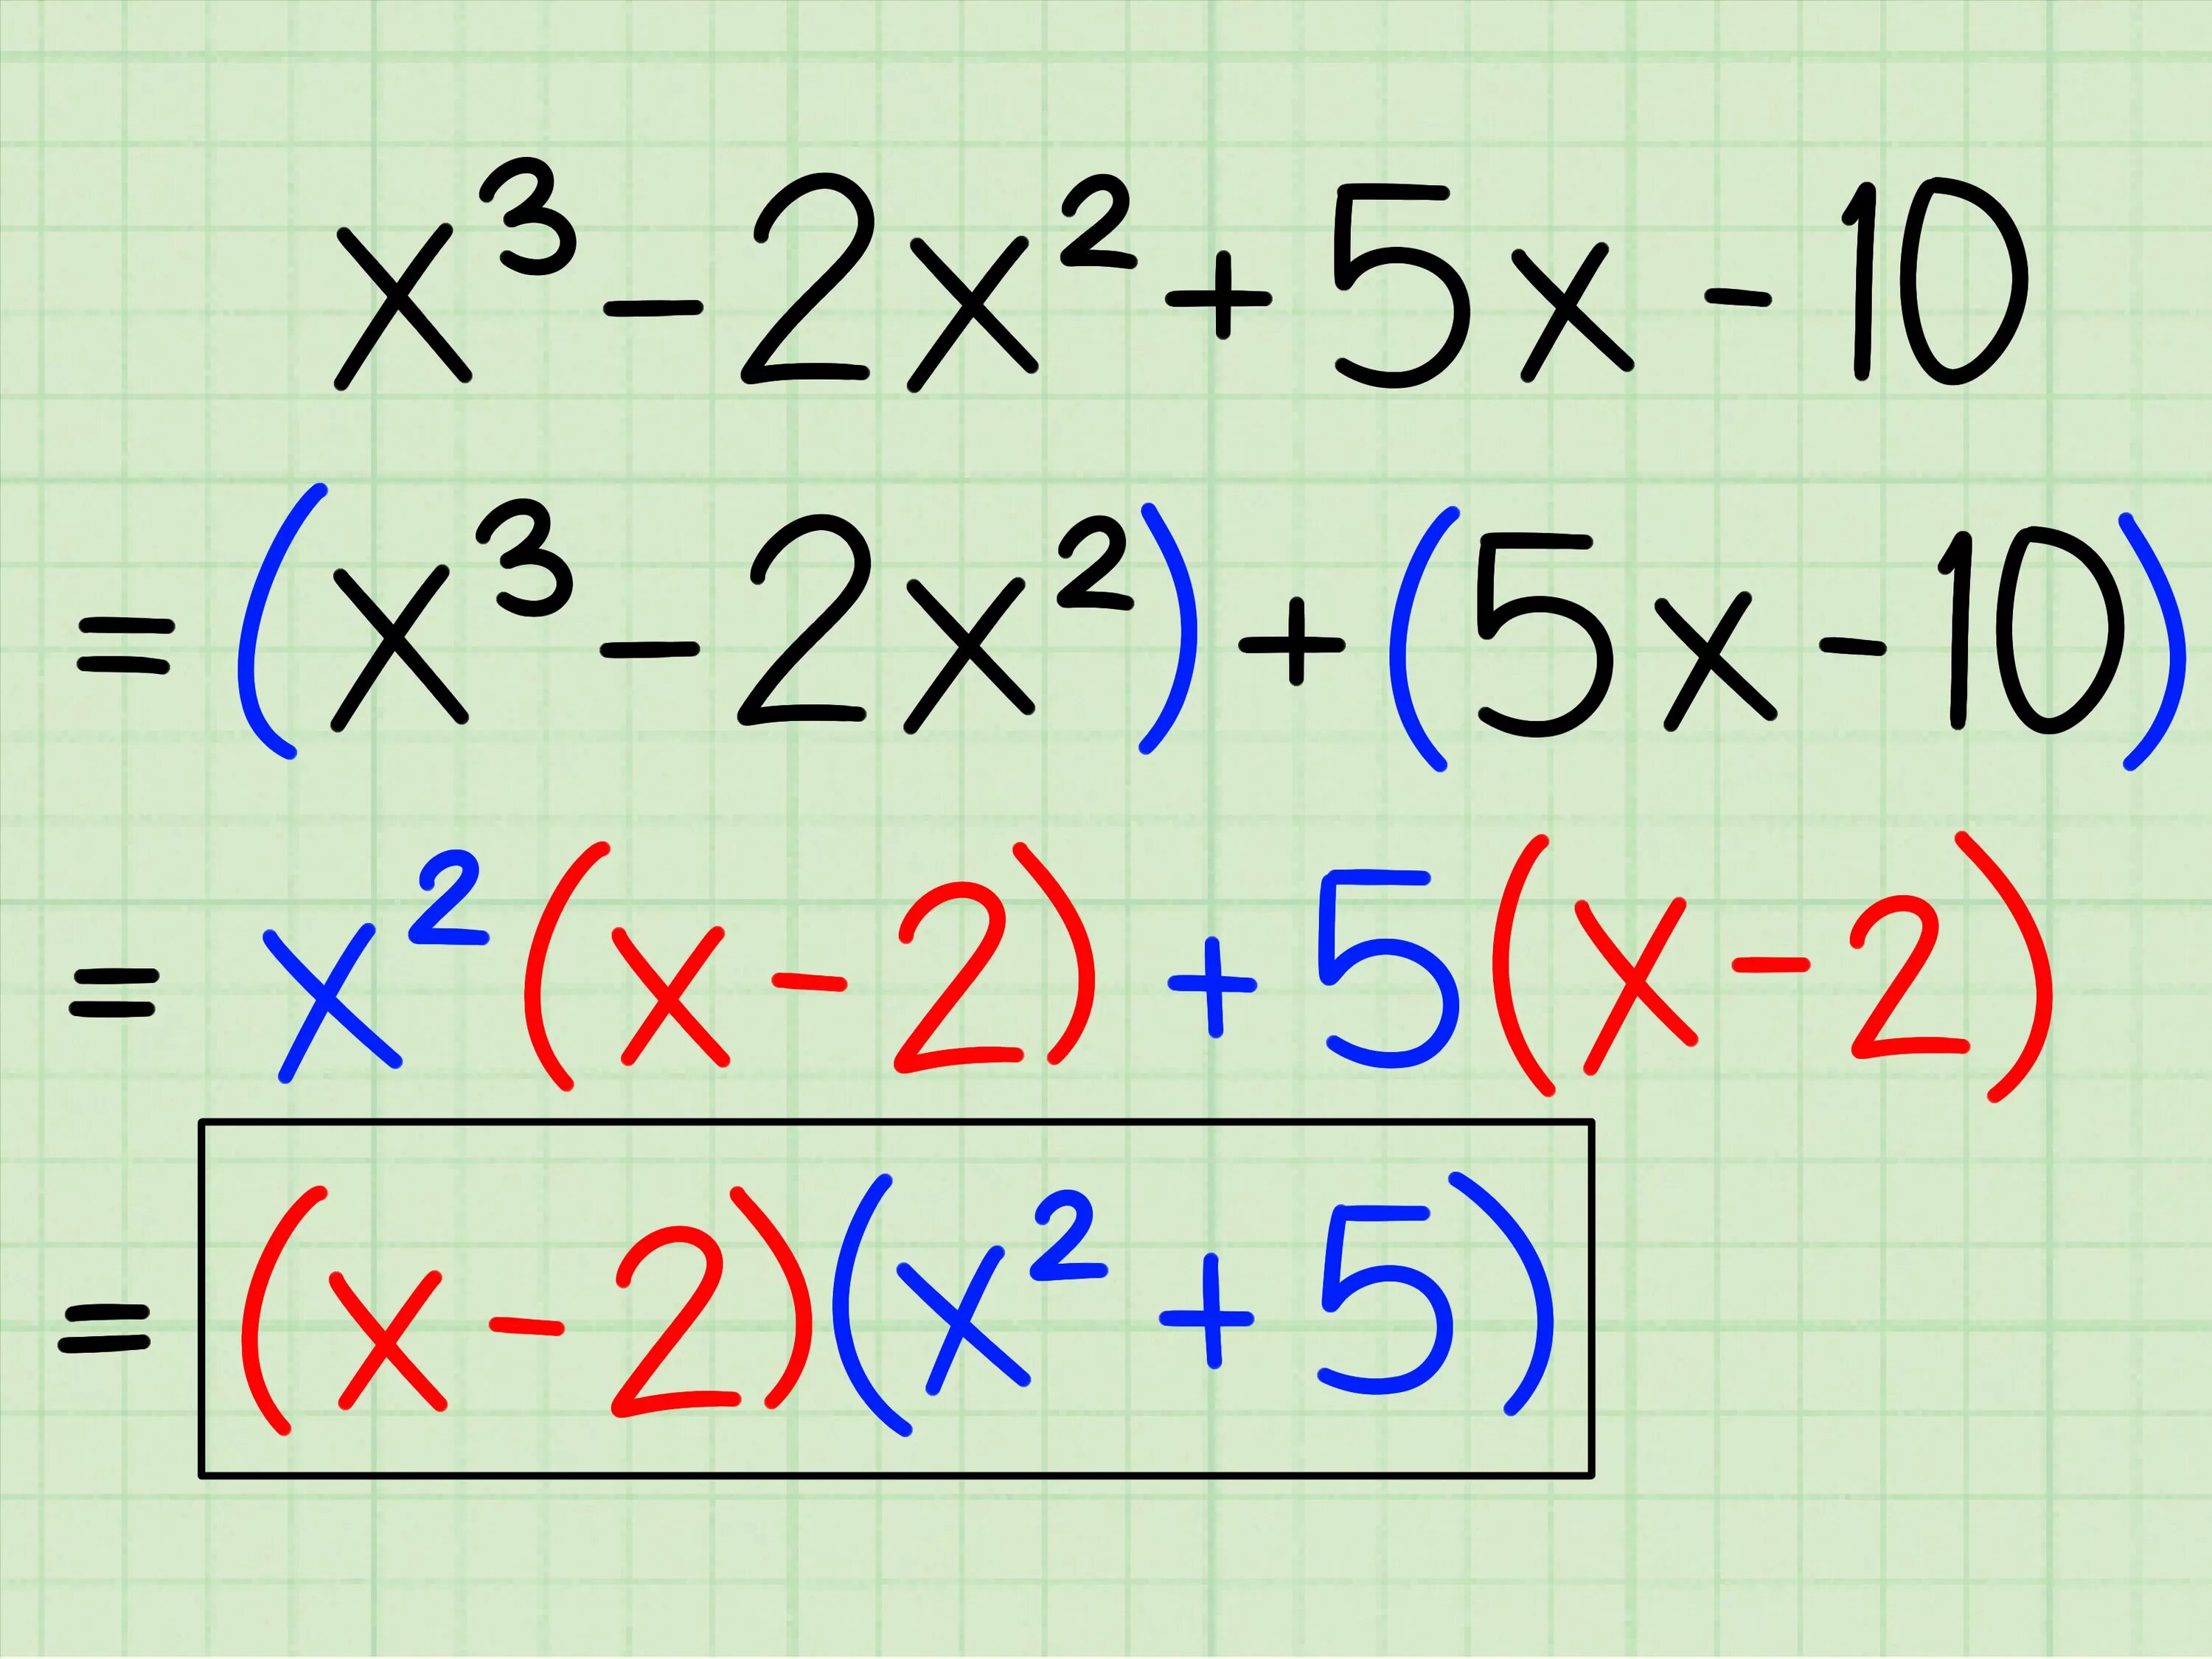 How to Factor. How to find Factor. Factoring polynomials bu grouping. Факторизовать х^^3.